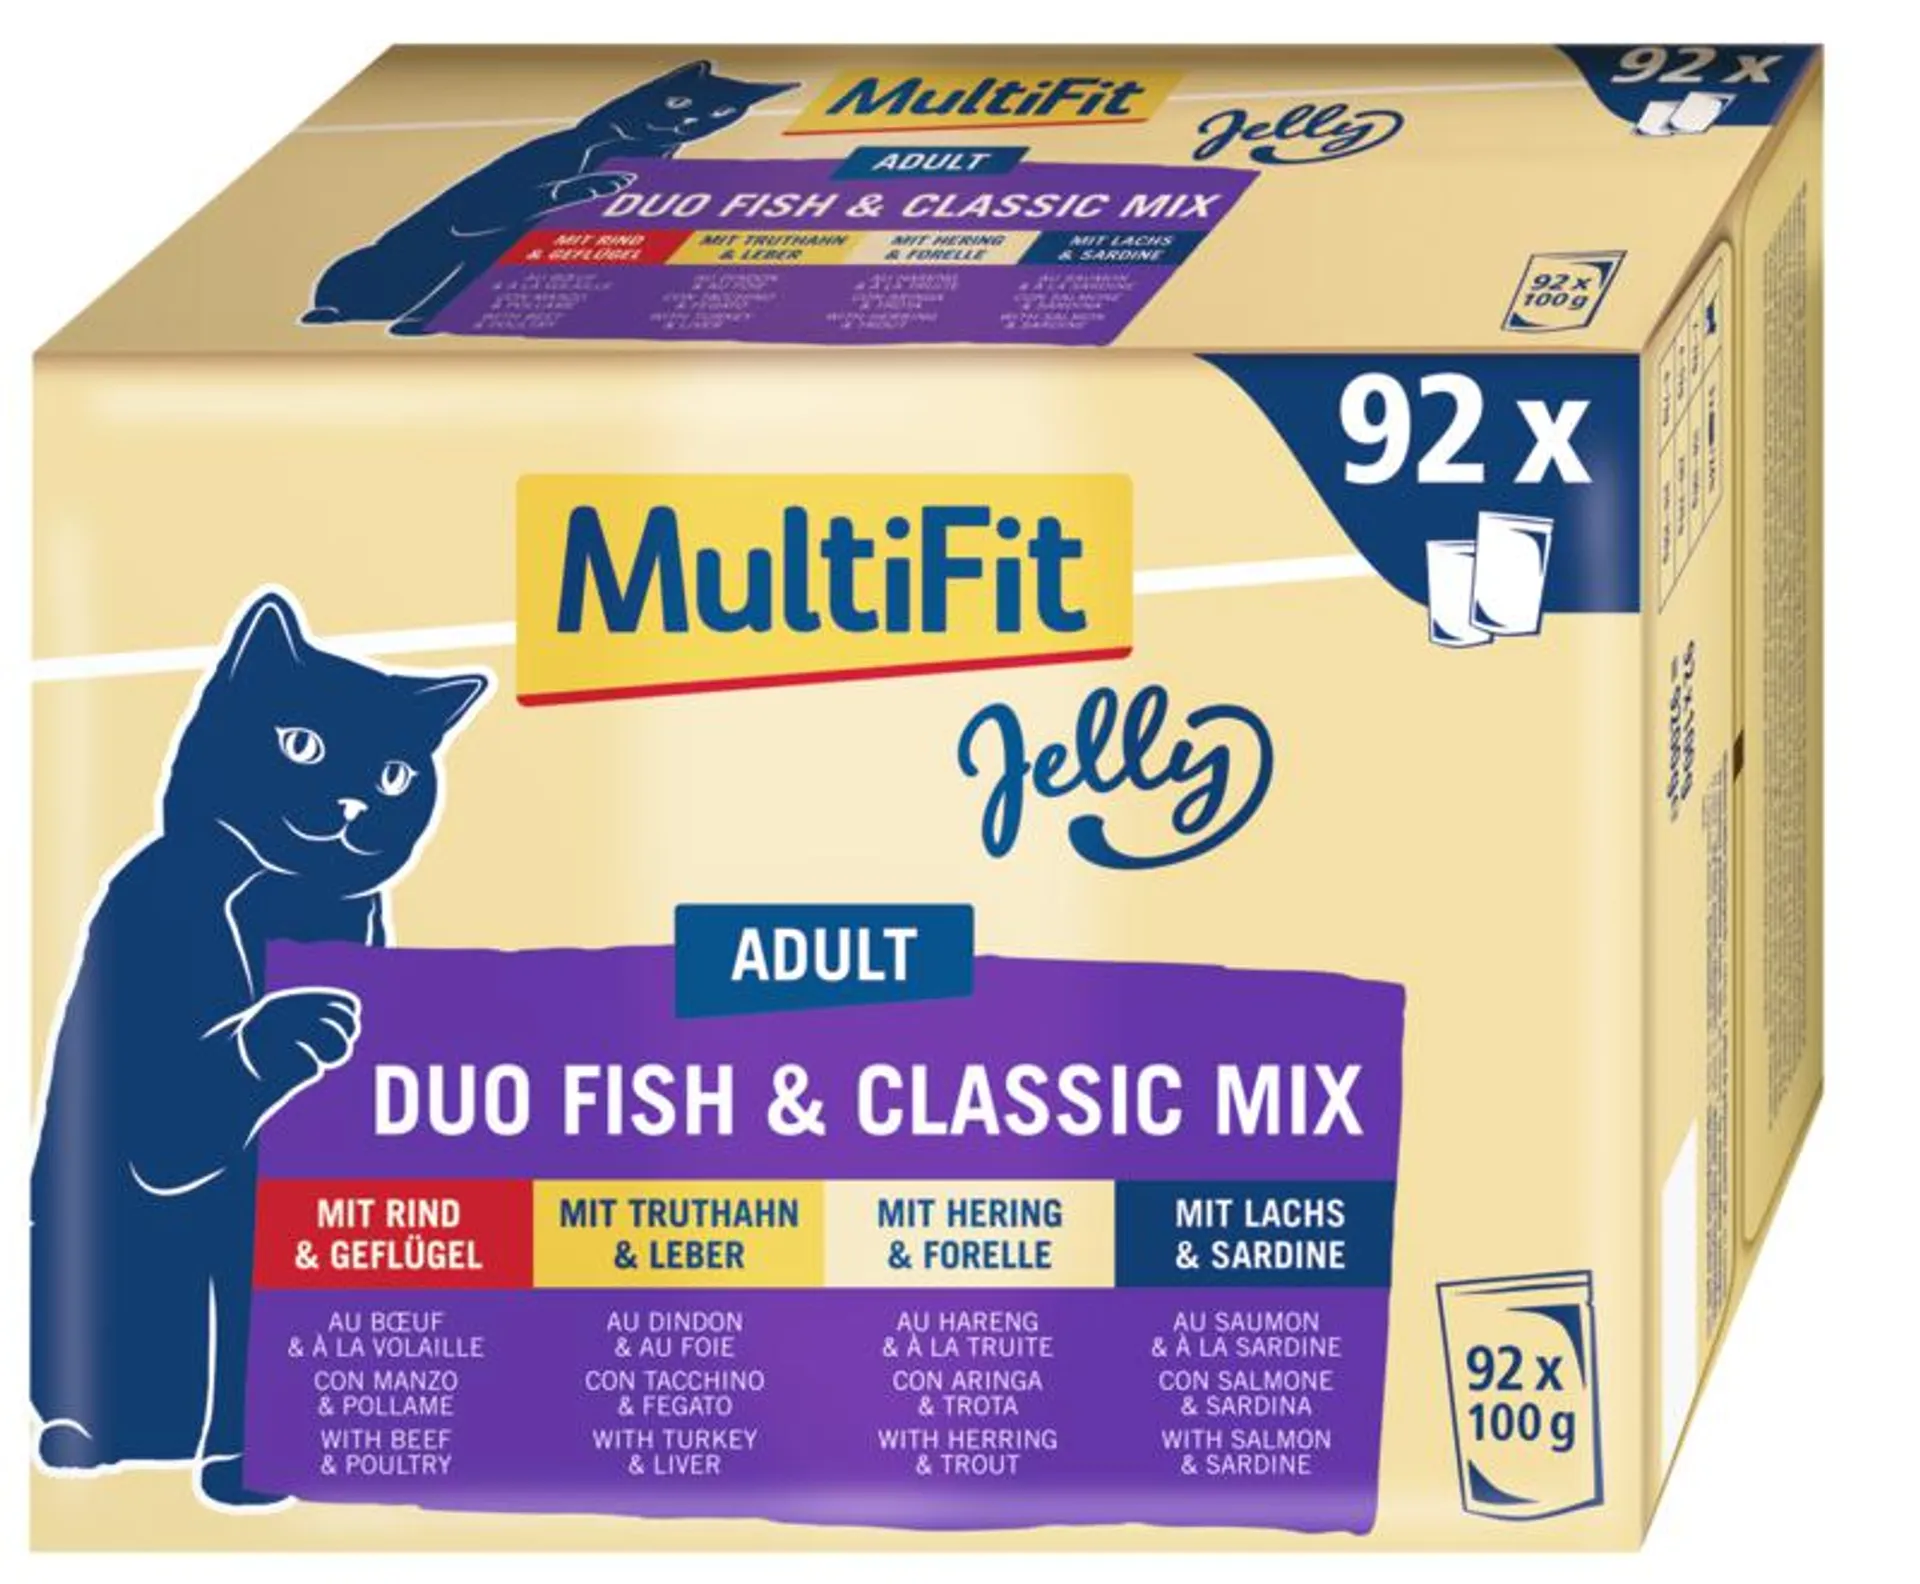 MultiFit Adult Jelly Duo Fish & Classic Mix Multipack XXL 92x100g